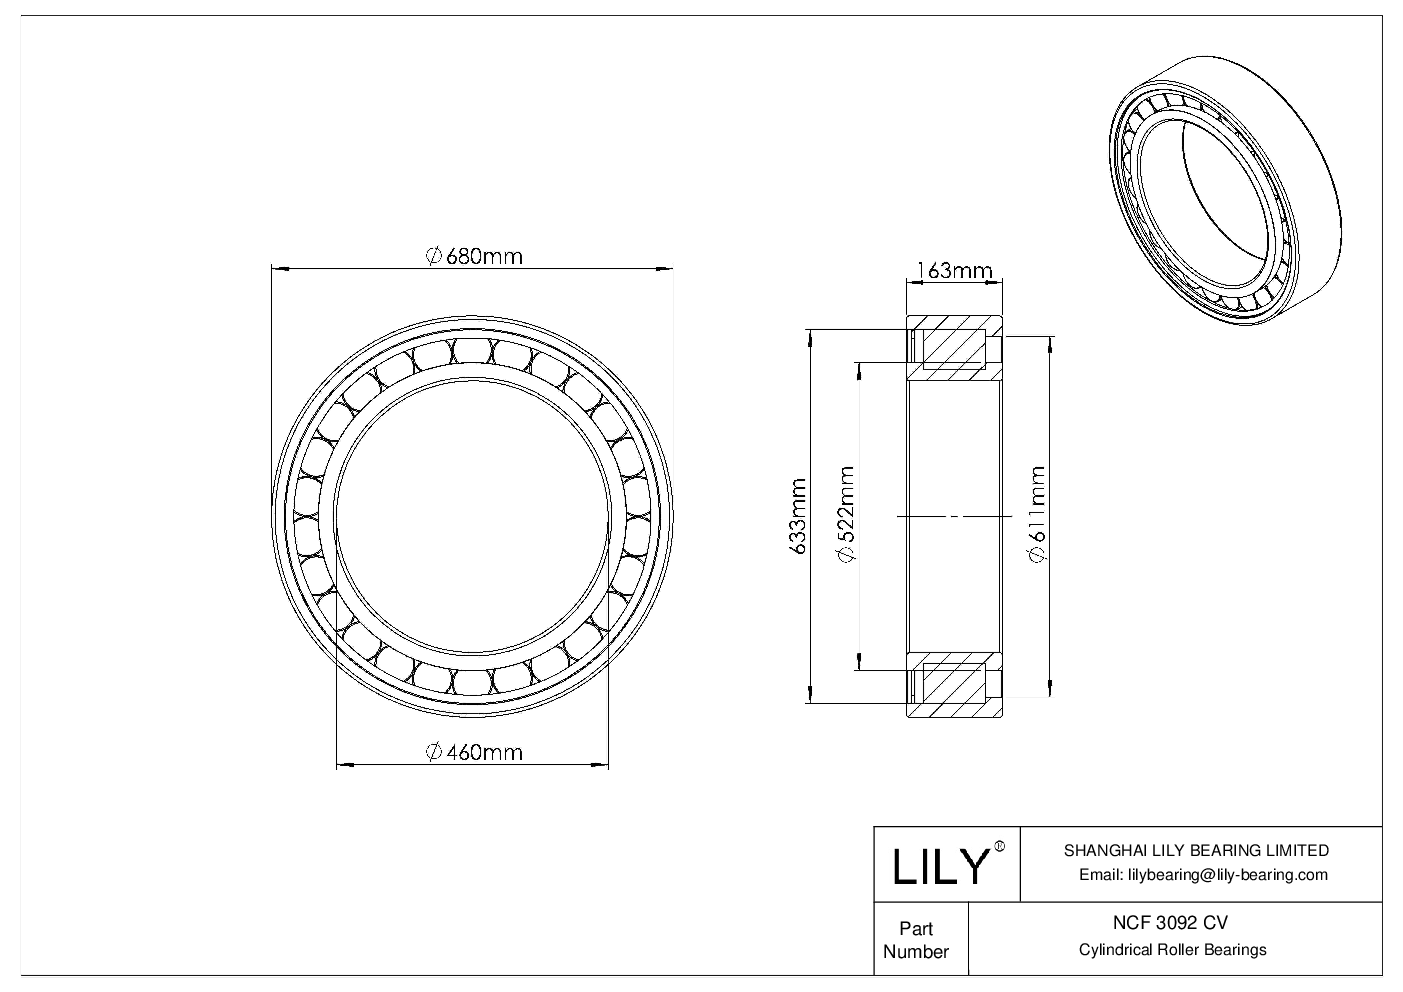 NCF 3092 CV Single Row Full Complement Cylindrical Roller Bearings cad drawing